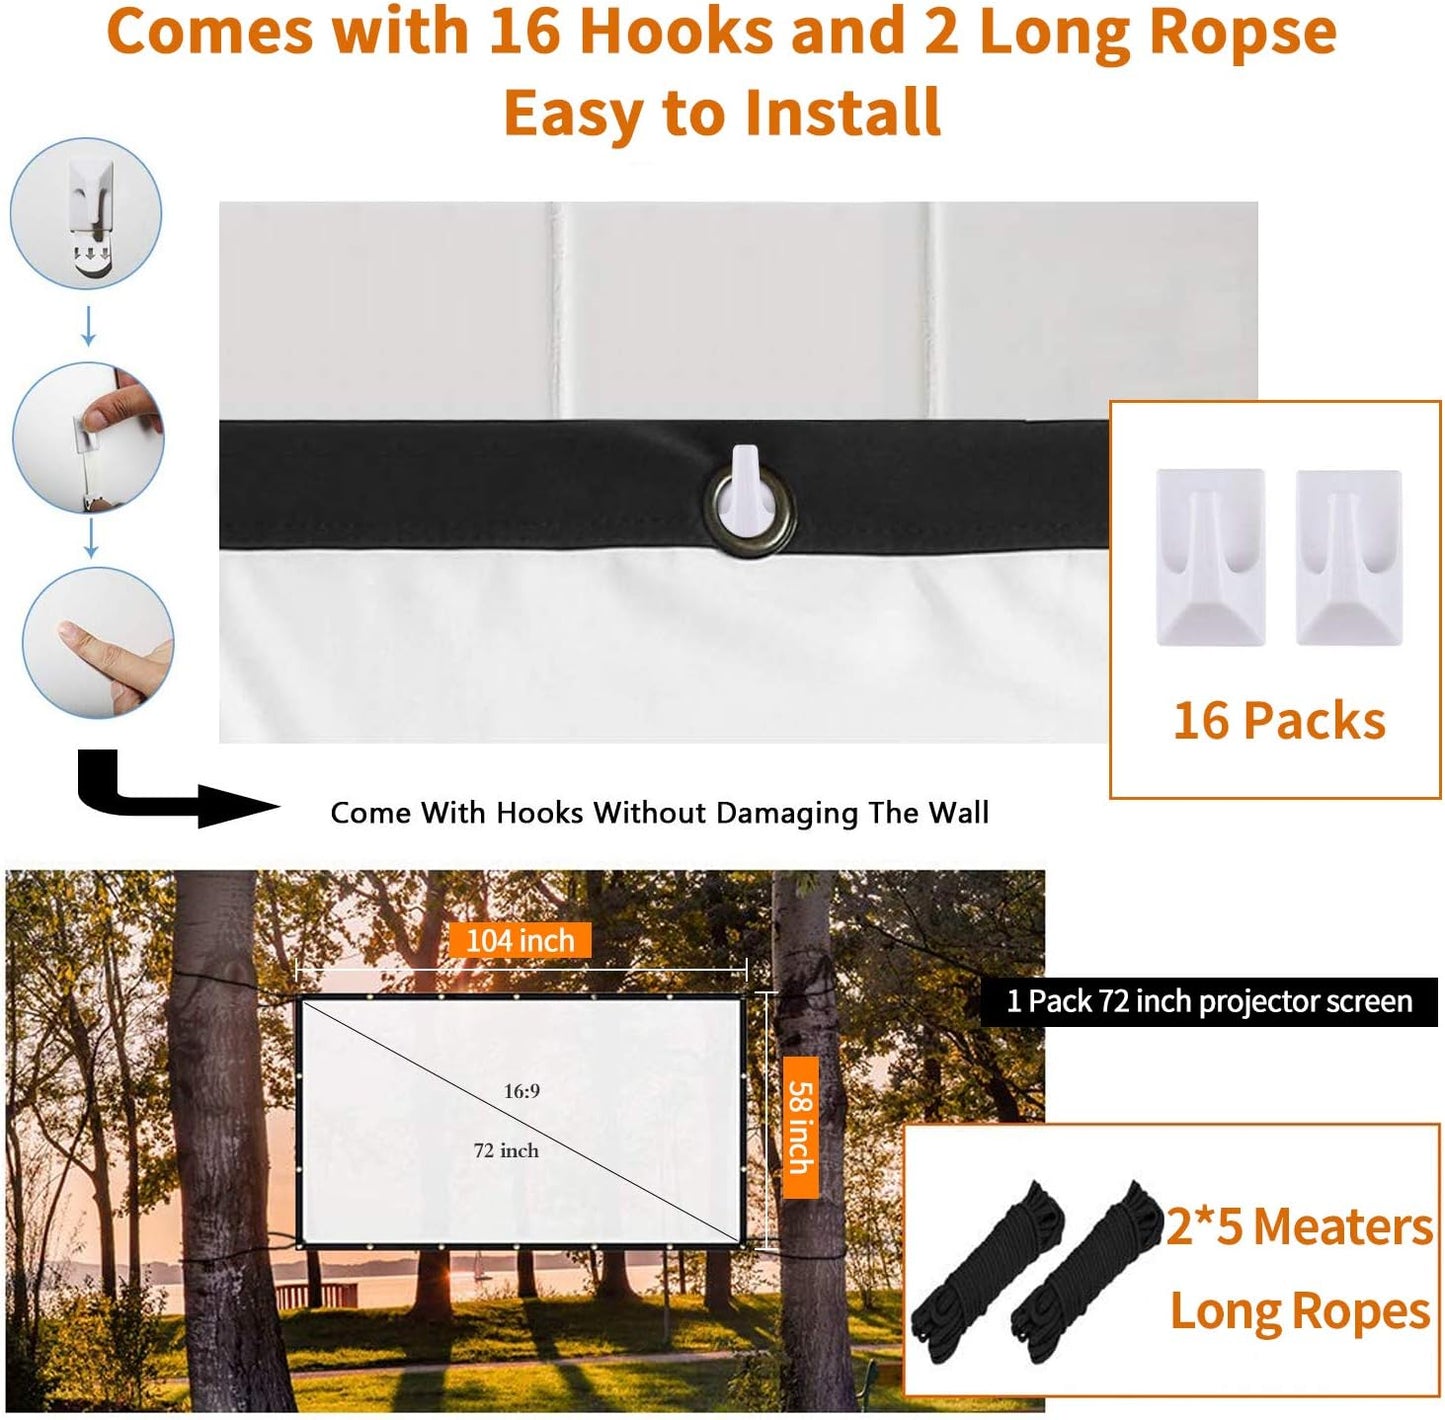 AMERTEER Projector Screen | Screen Projector Outdoor | Outdoor, Indoor, Backyard Projector Screen | Rollup Projector Screen with 16 Hooks and 2 Long Ropes-1 Pack 72 inches Foldable Projection Screen